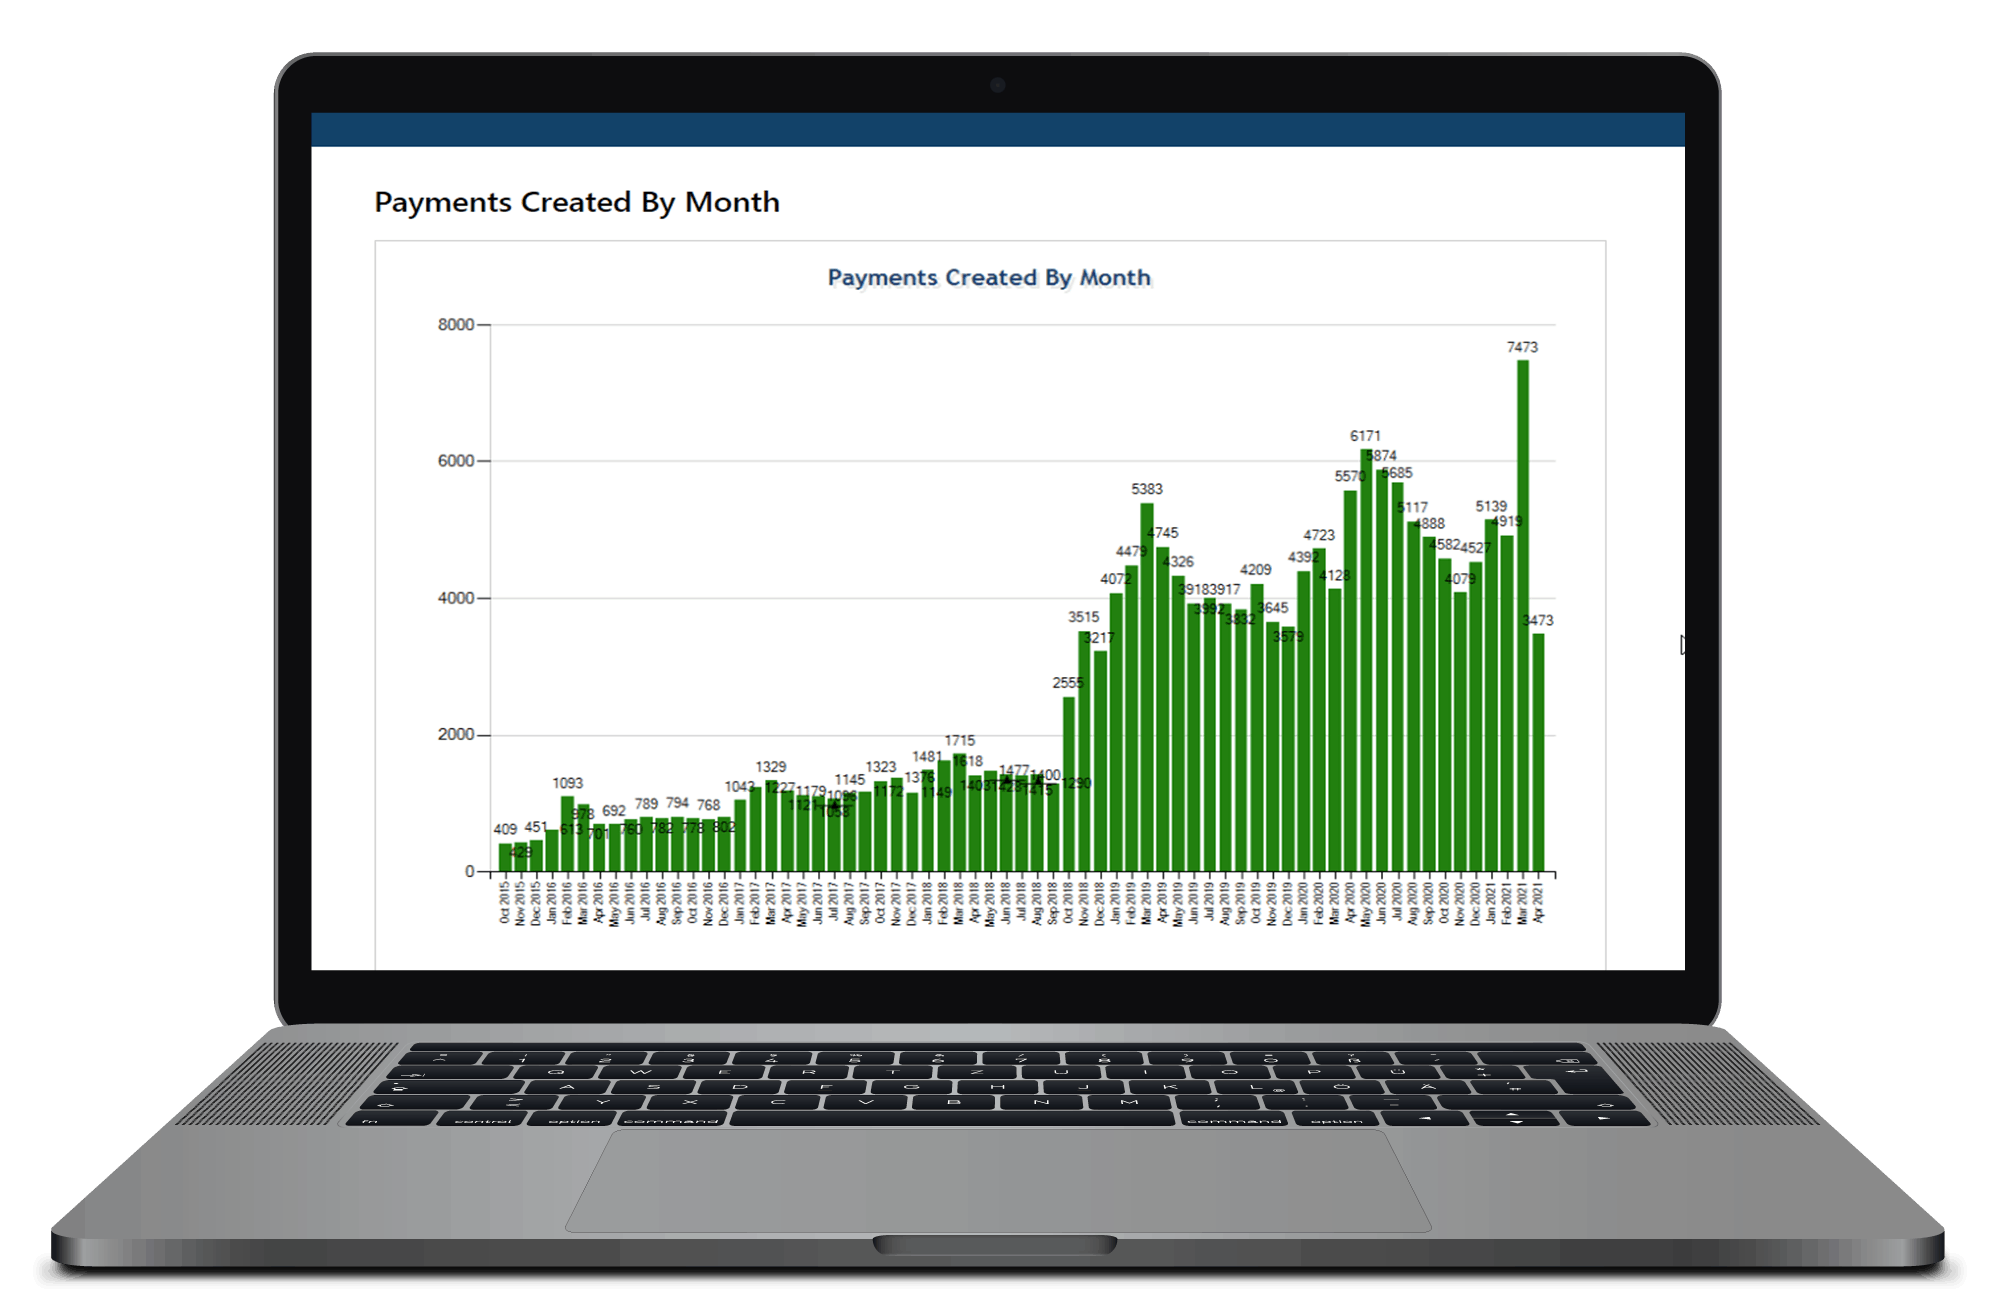 Payment bar graph report created by month